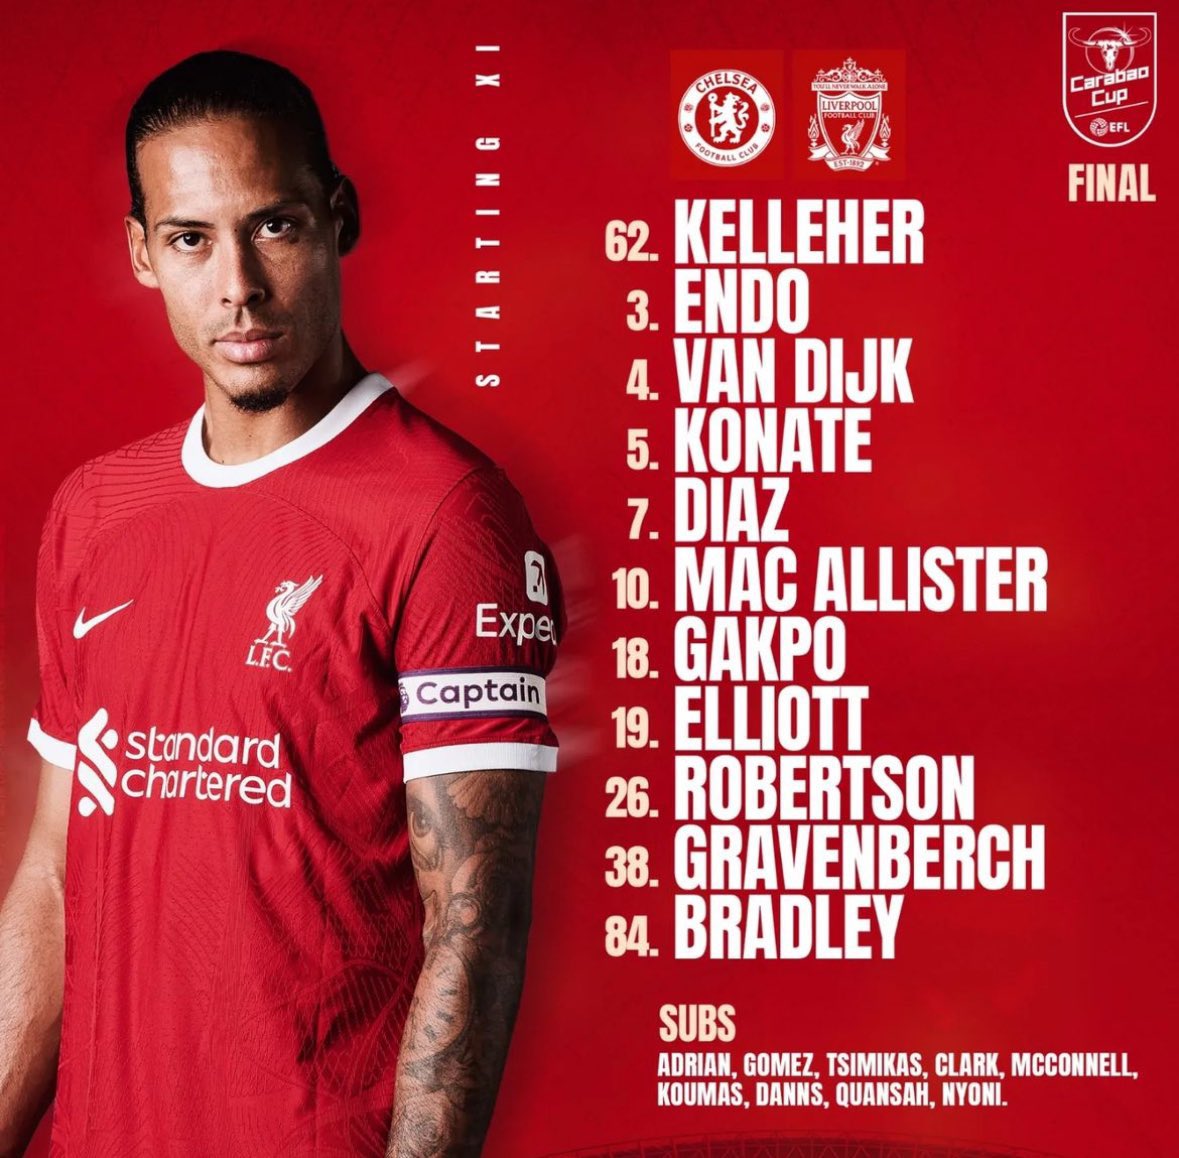 Goooal… Liverpool LiverBirds this is my team